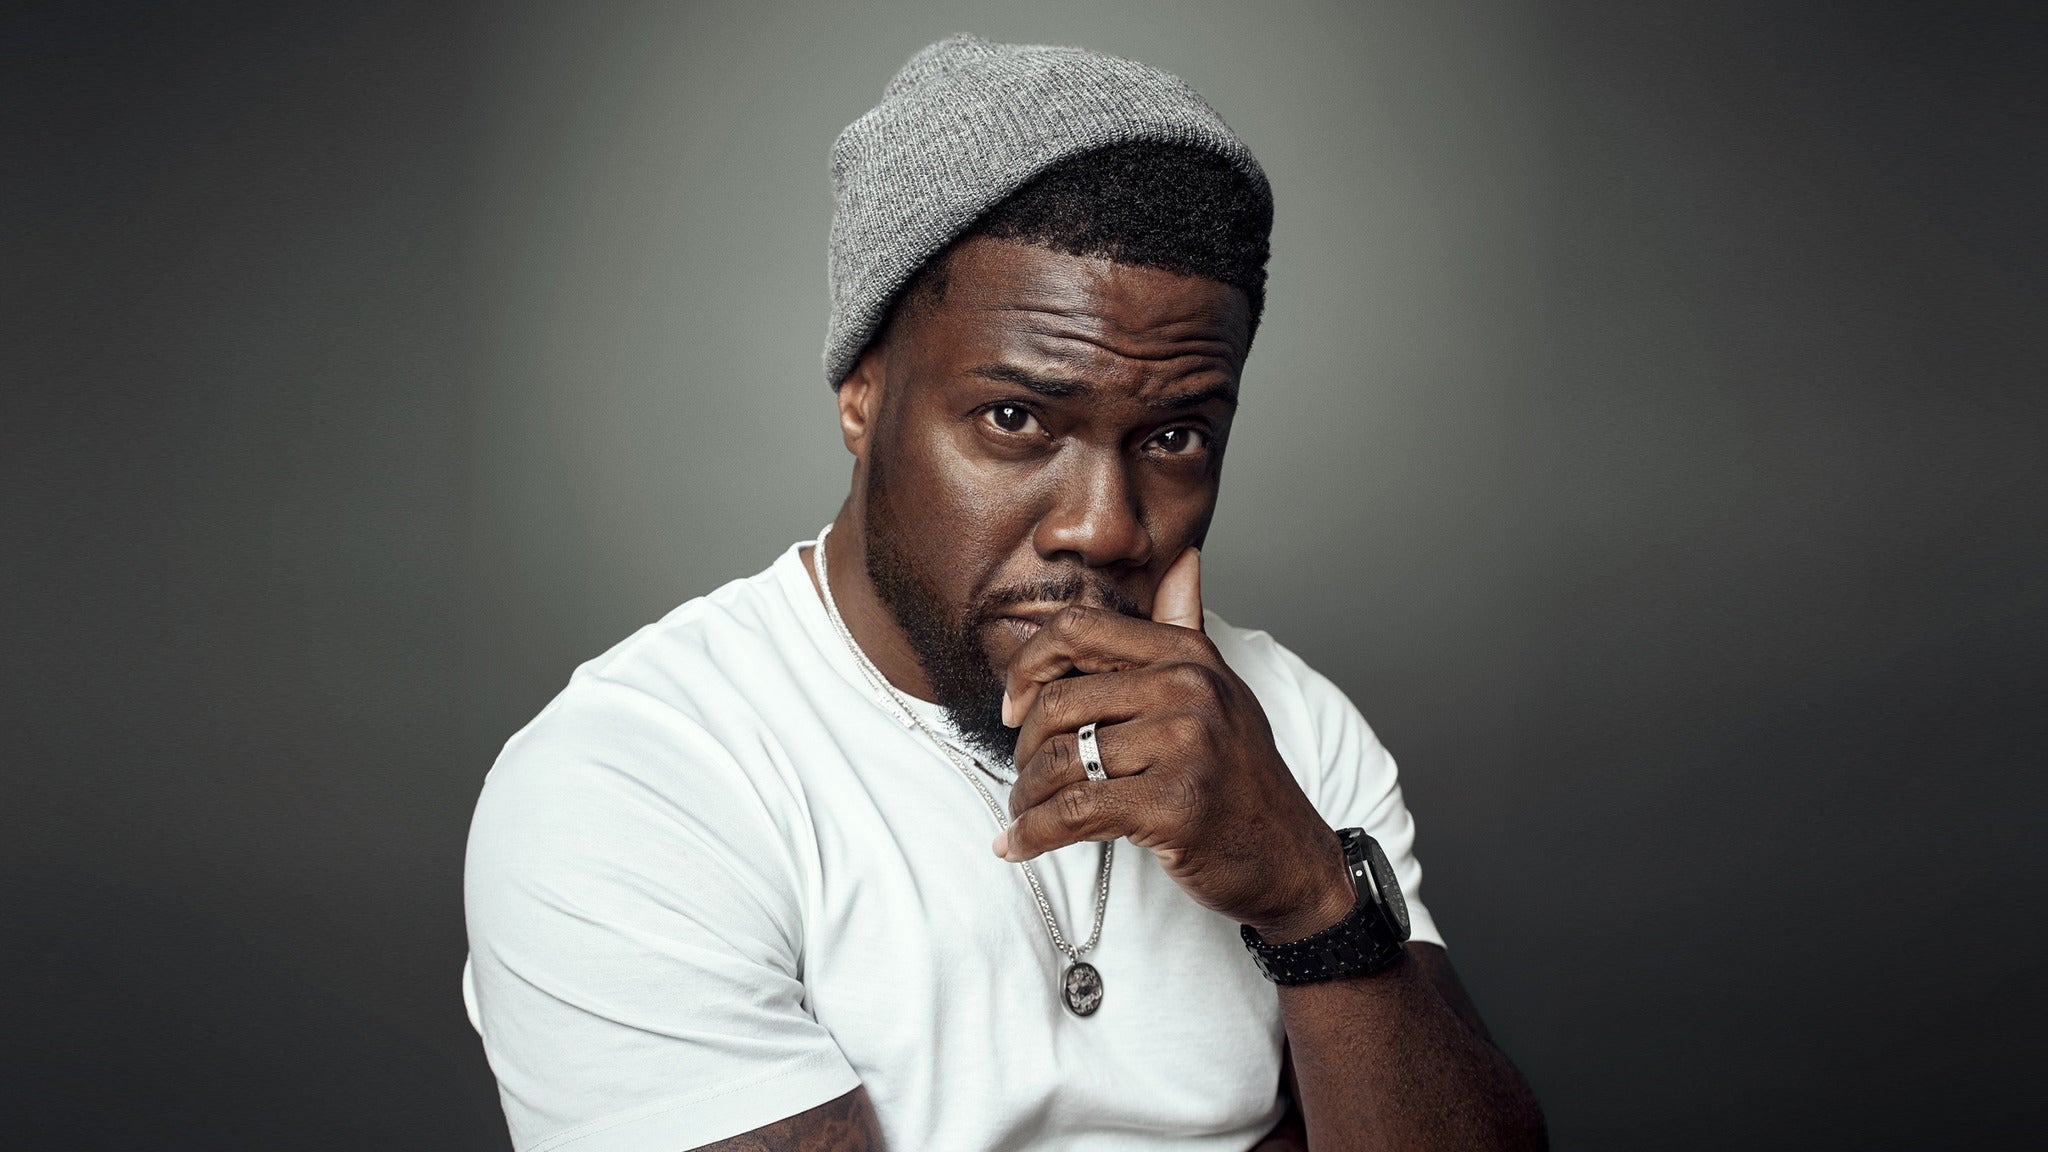 Kevin Hart: Reality Check at Climate Pledge Arena